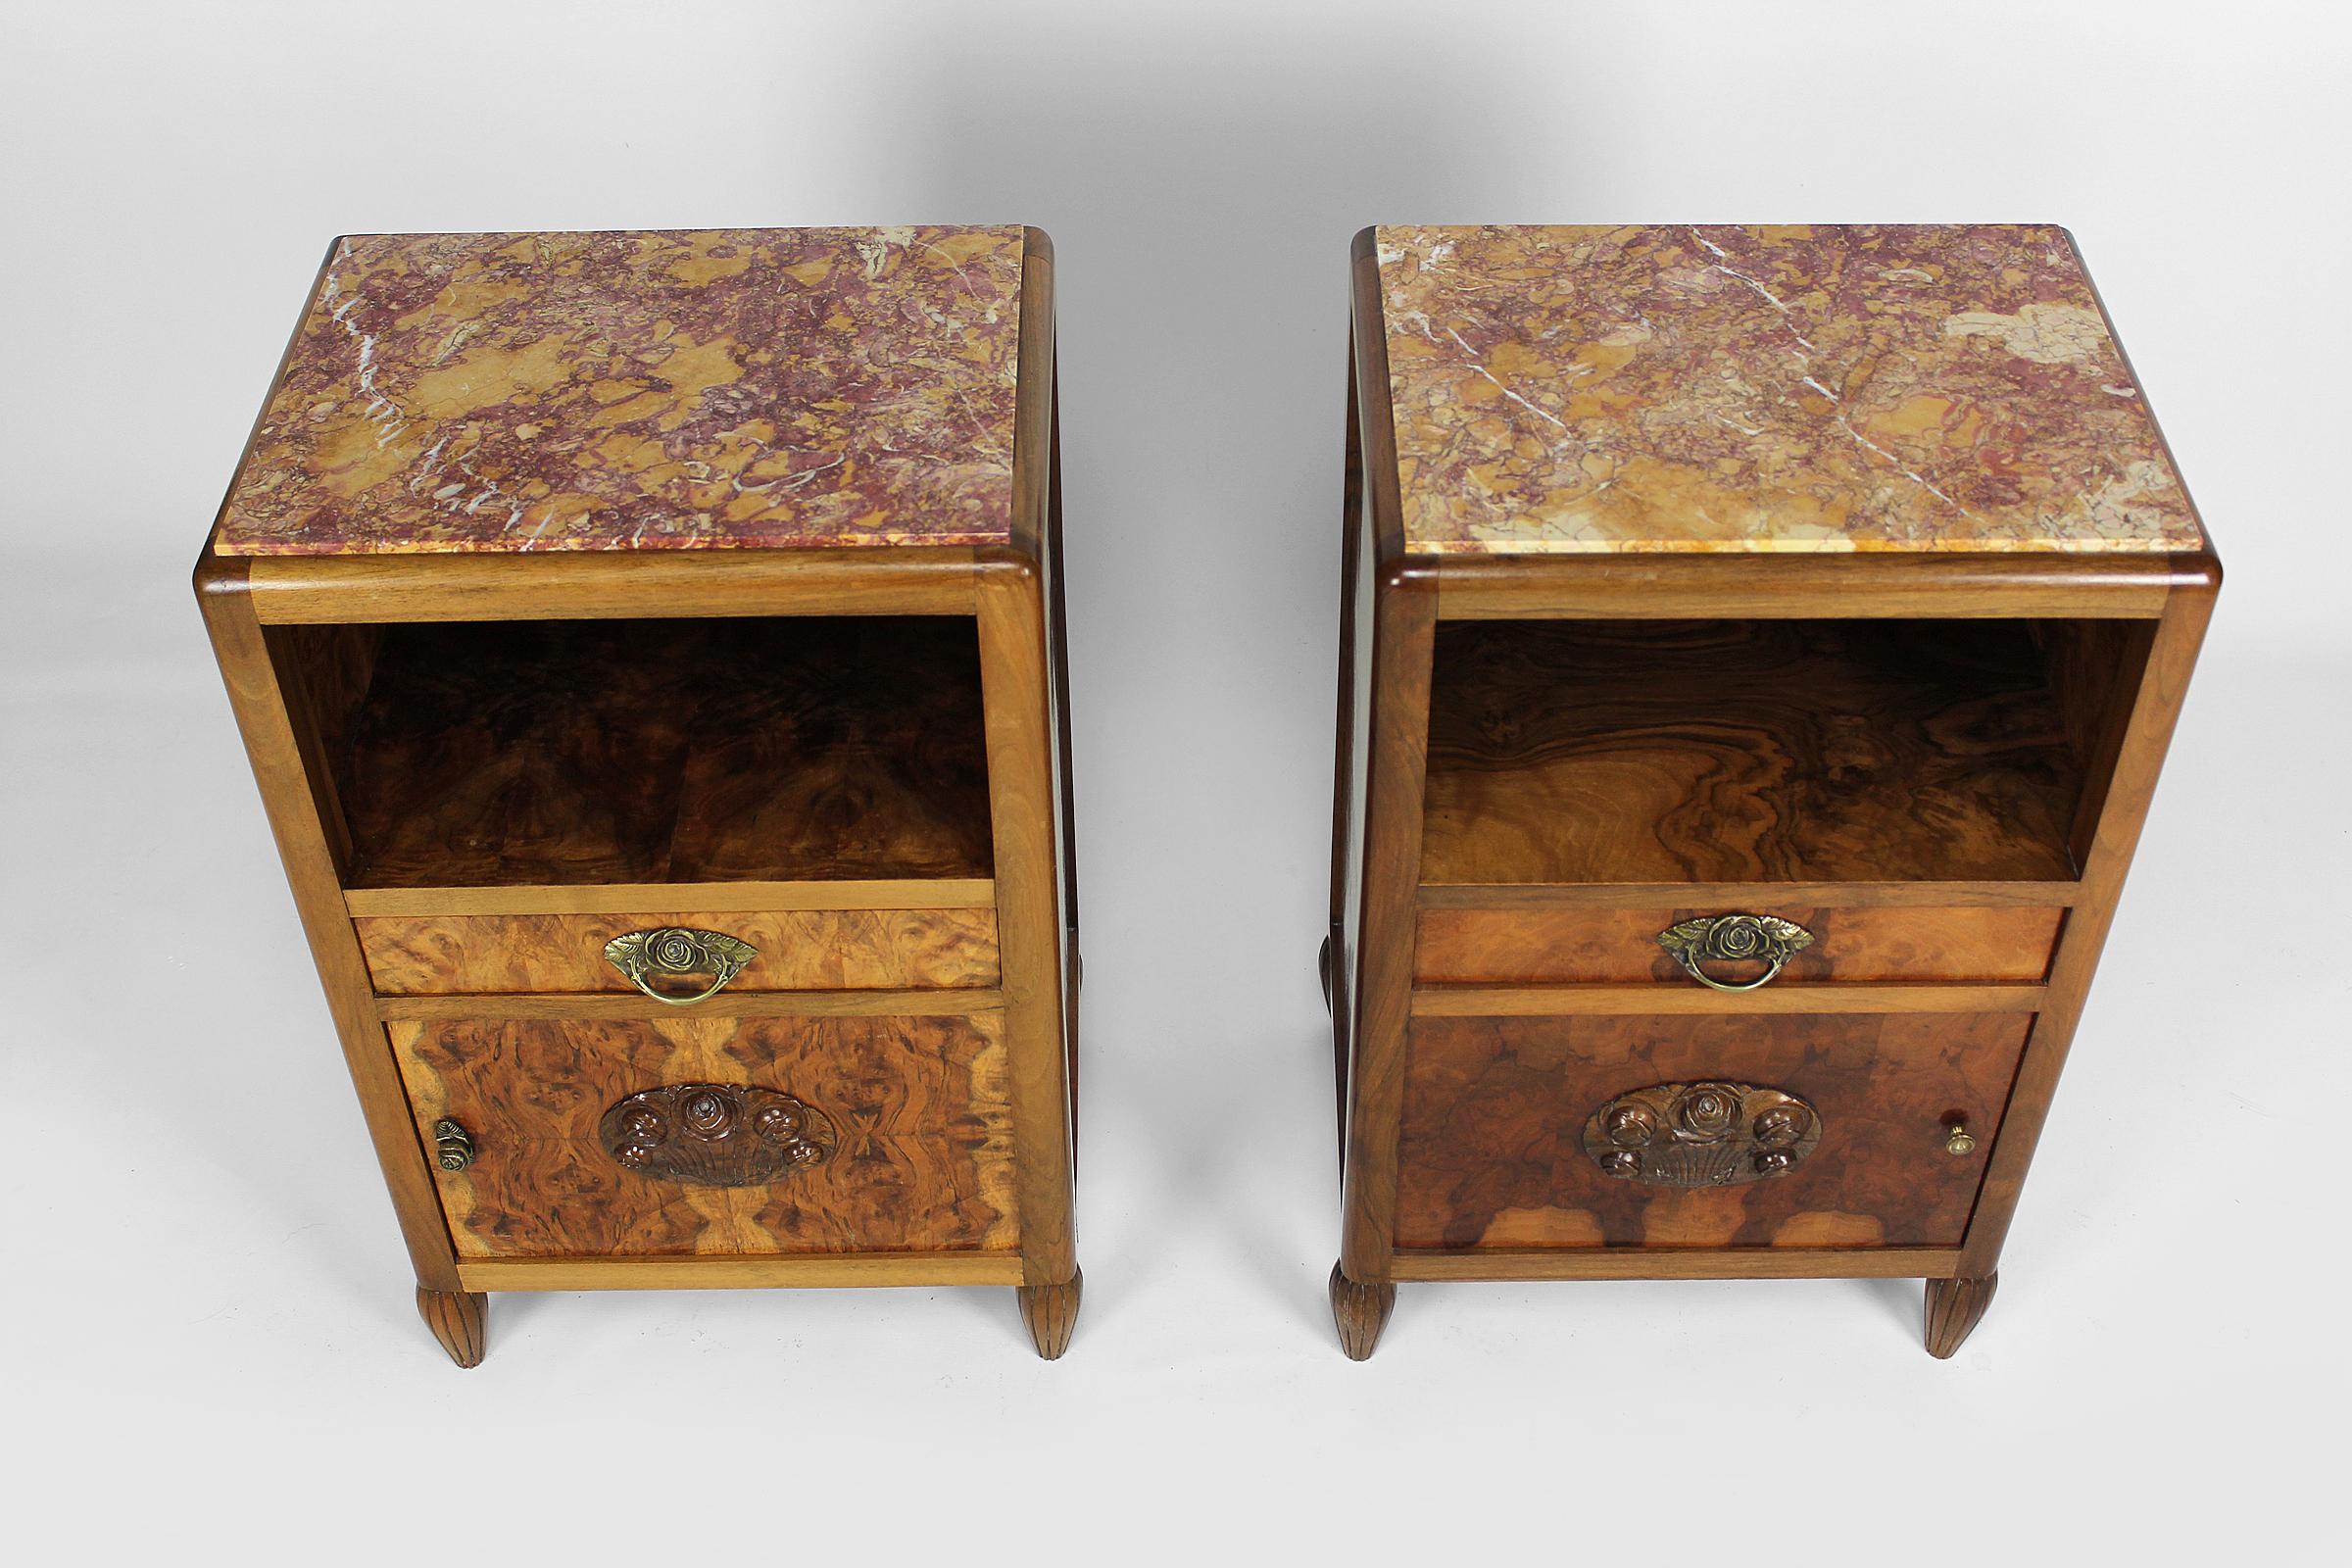 Pair of Art Deco Bedside Tables by Ateliers Gauthier-Poinsignon, circa 1920-1930 For Sale 3